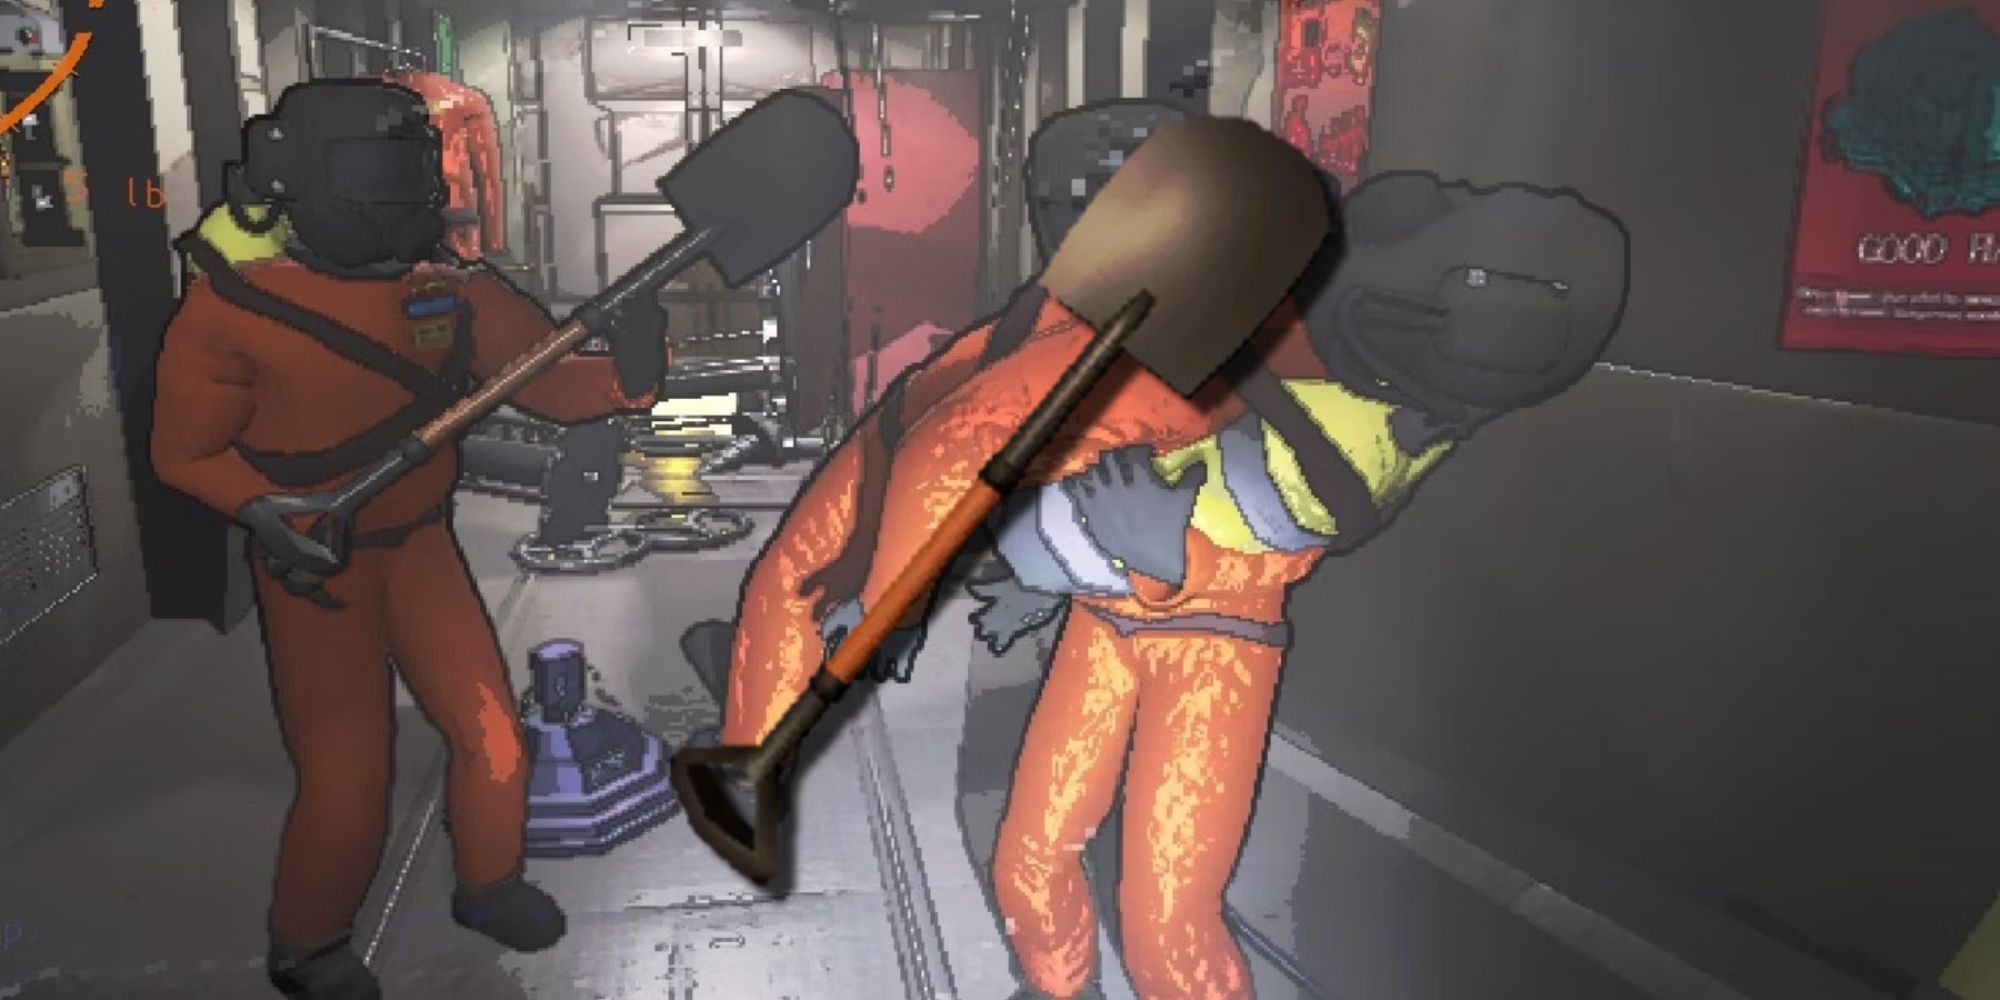 A player holding a shovel, a weapon from the game, and a player holding a dead body likely due to a shovel hit